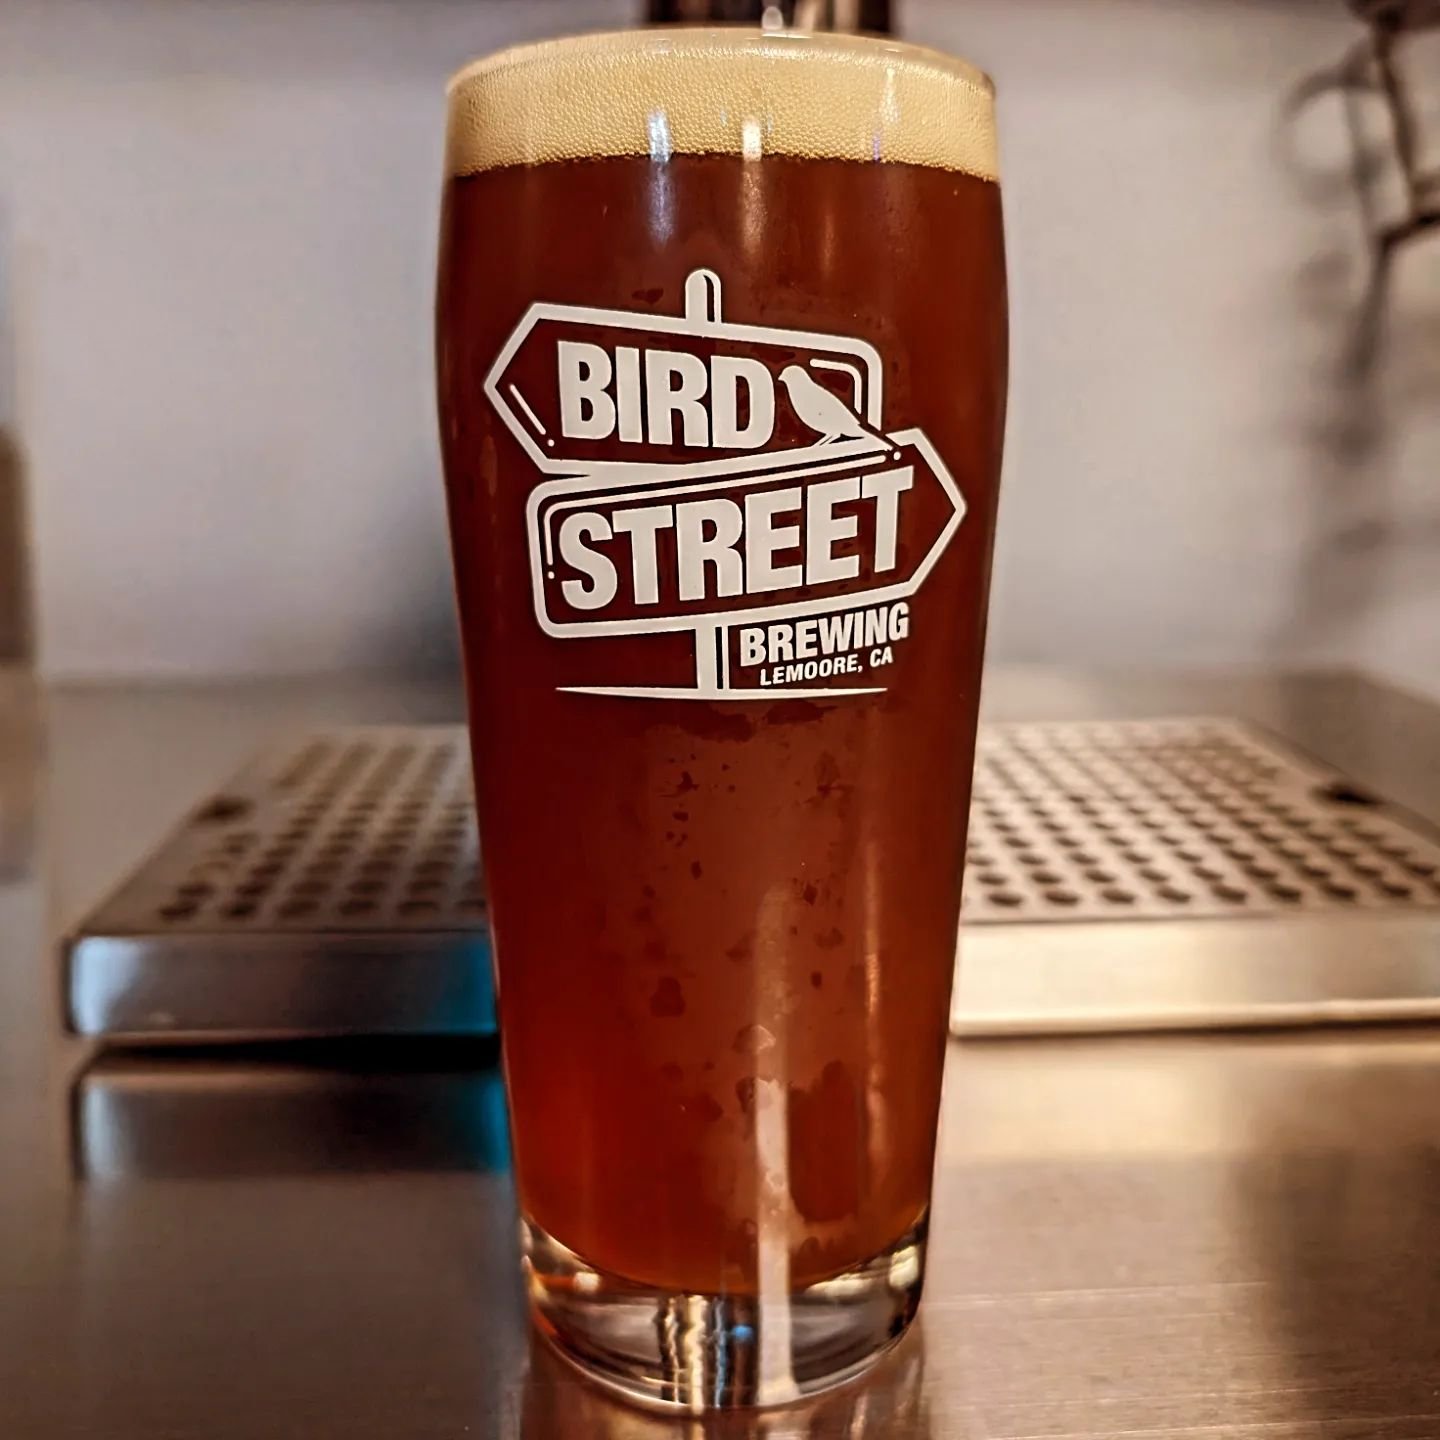 We've got a biiiiiiig beer on tap this week!
This is &quot;The Coalition,&quot; an English-style Imperial Amber with a caramel, malty-sweet flavor with a hint of oak derived character. It's big at 9%abv and definitely one you should sip to enjoy.

Oh